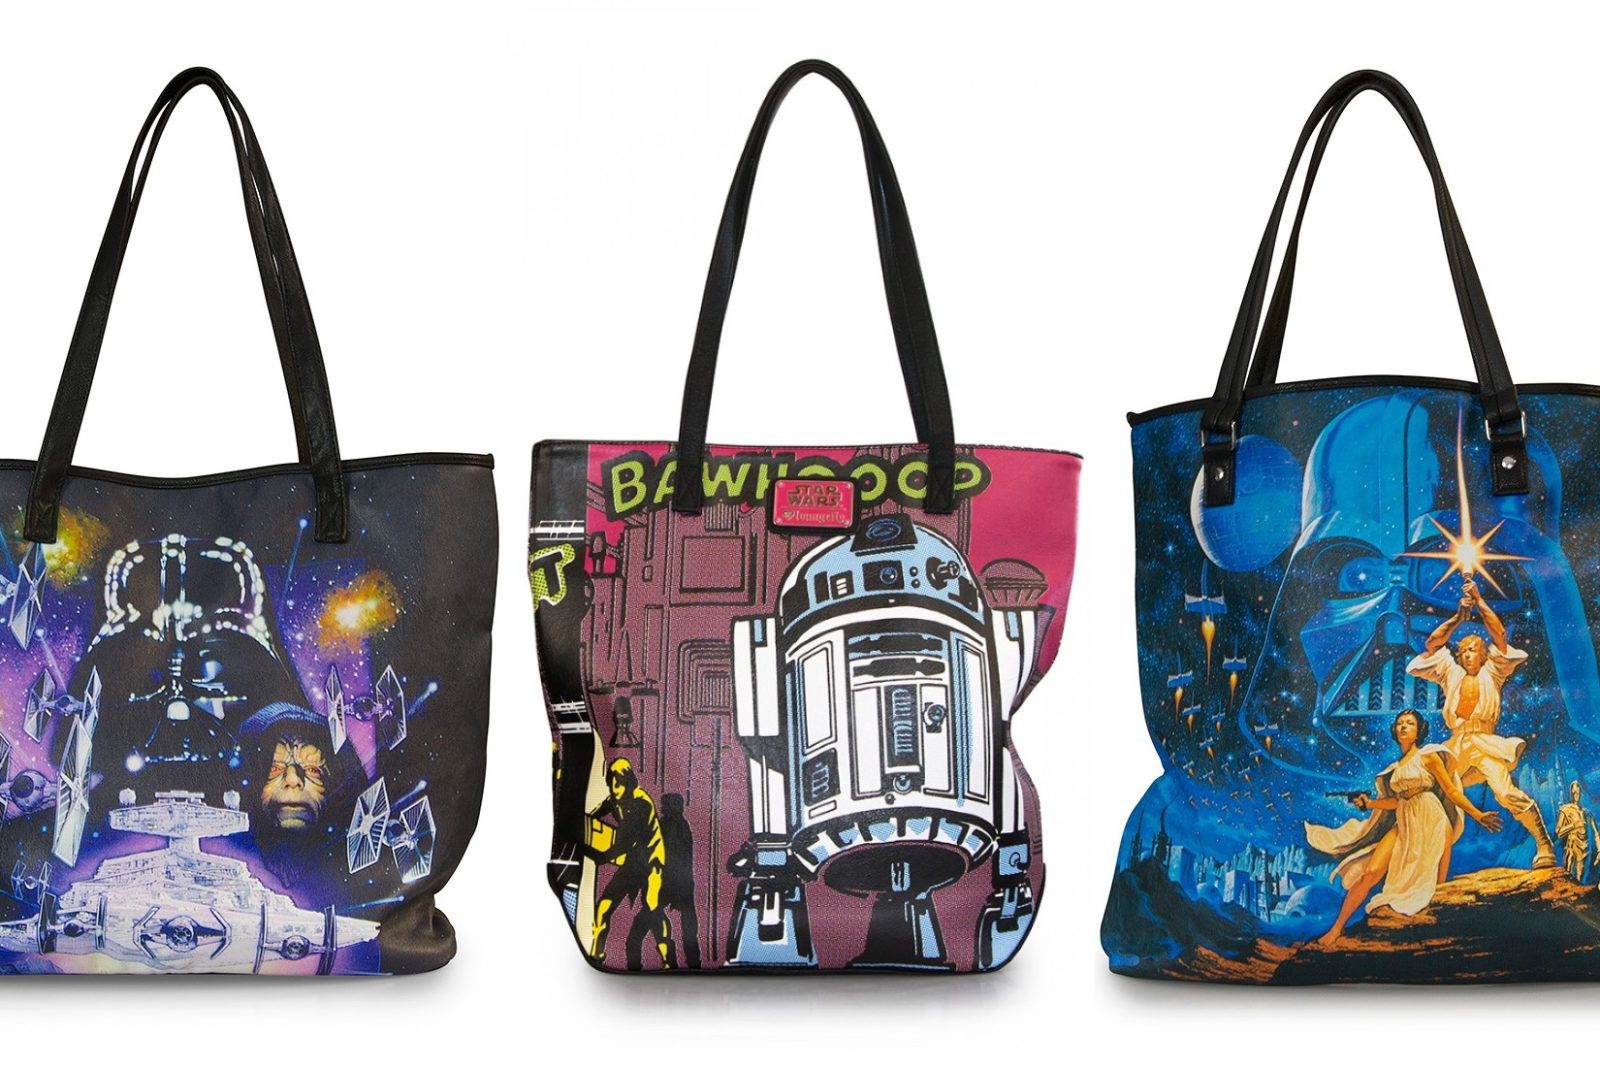 Loungefly x Star Wars Tote Bags On Sale